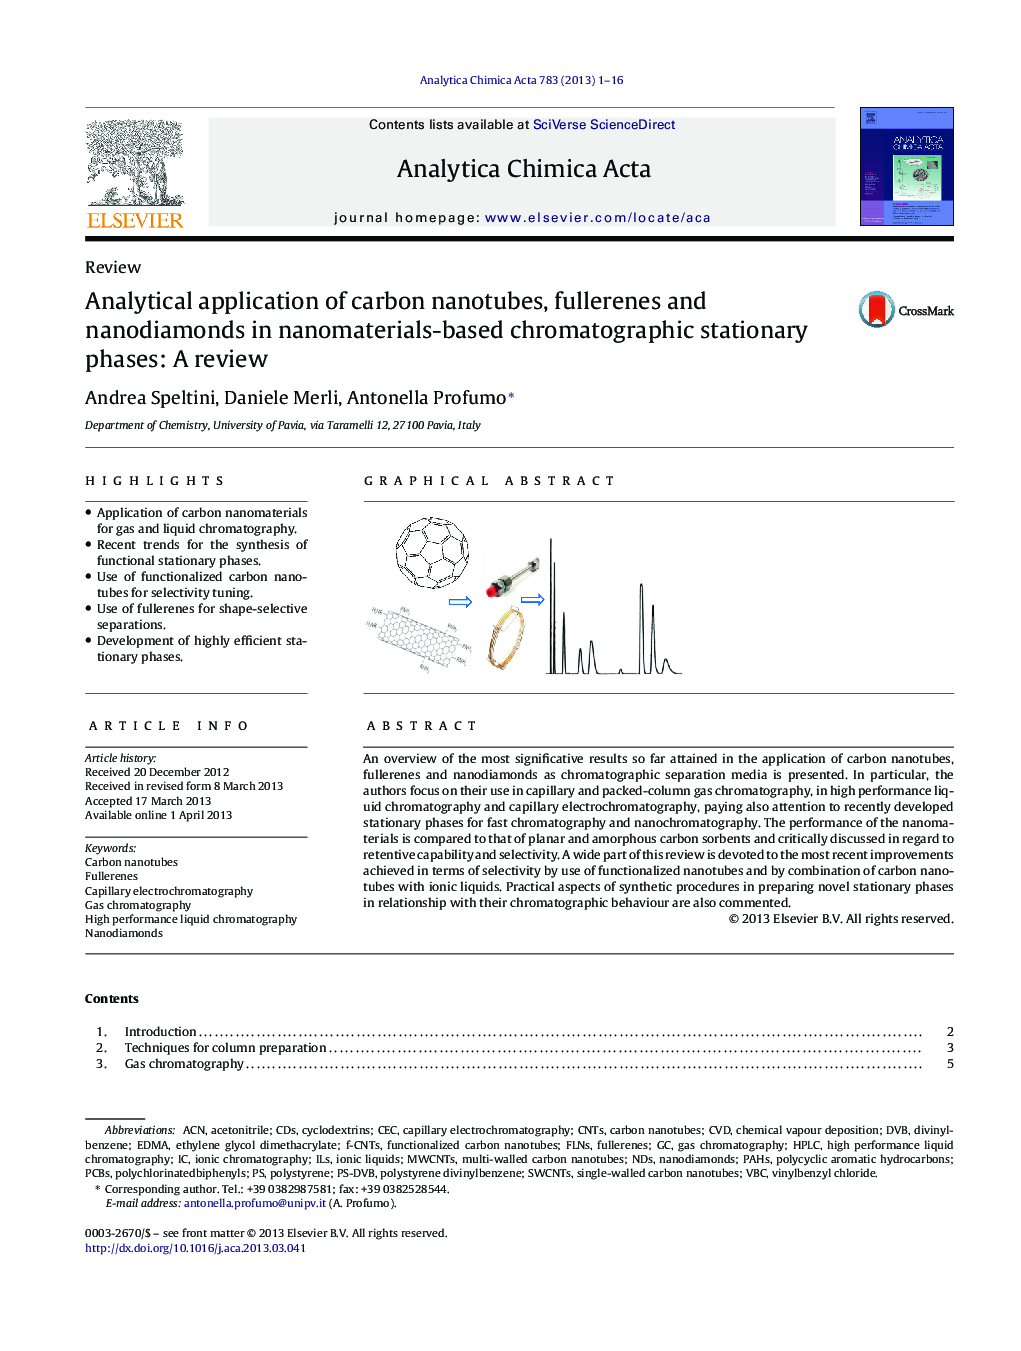 Analytical application of carbon nanotubes, fullerenes and nanodiamonds in nanomaterials-based chromatographic stationary phases: A review